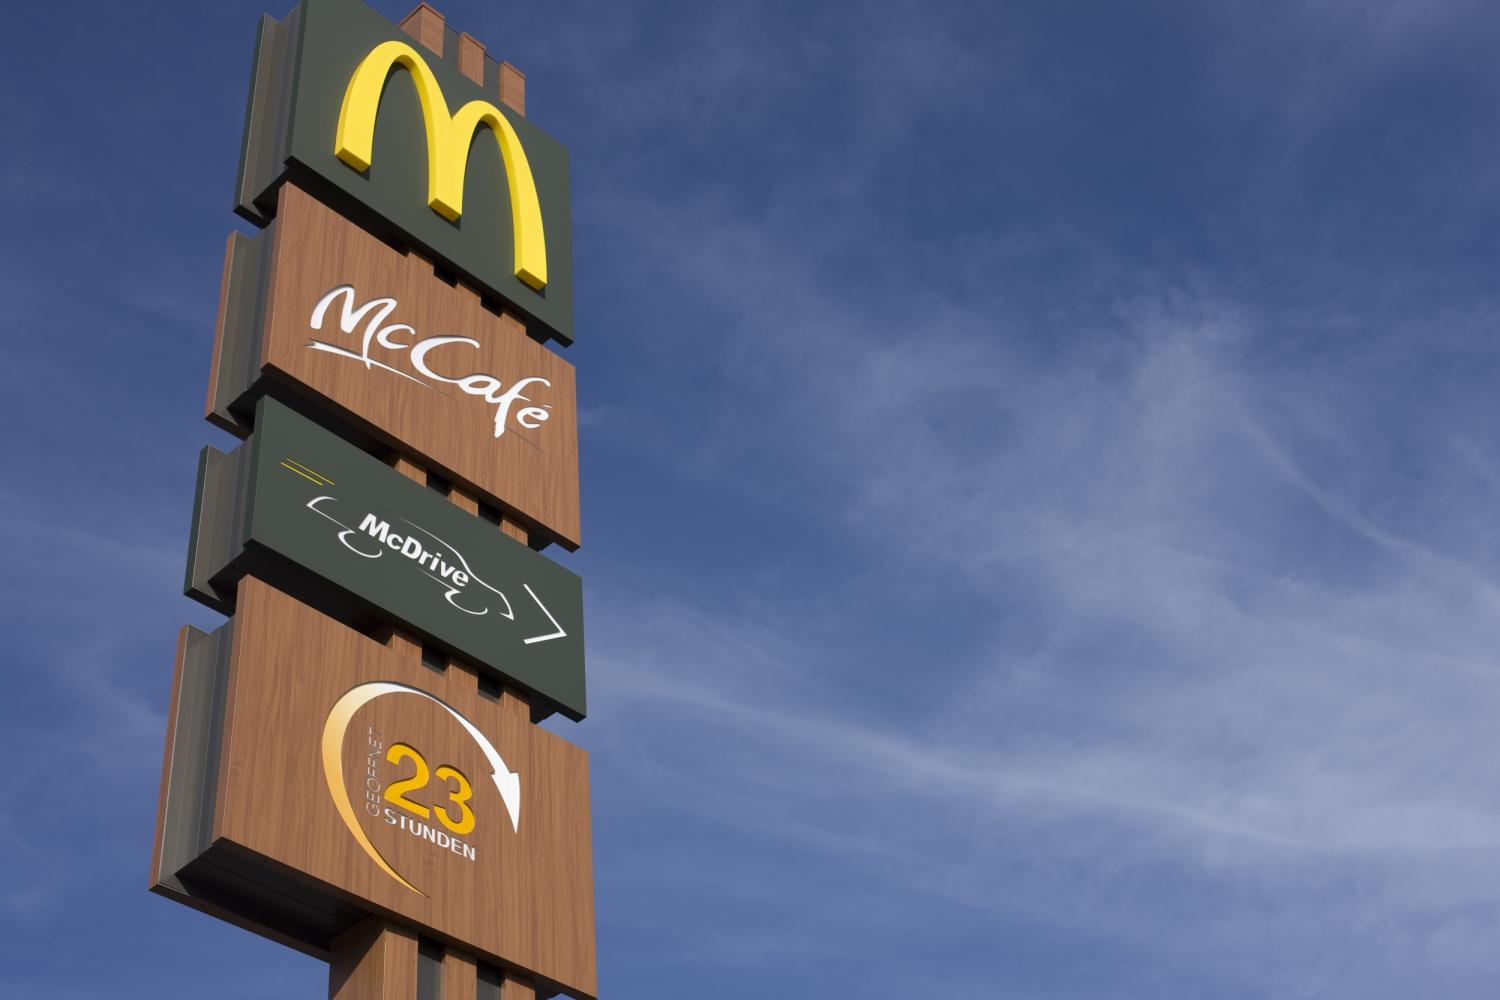 McDonald’s and AARP announced they have entered into a partnership to help the company and its thousands of franchisees get connected to what could be up to 250,000 potential employees in the 55-and-older demographic.